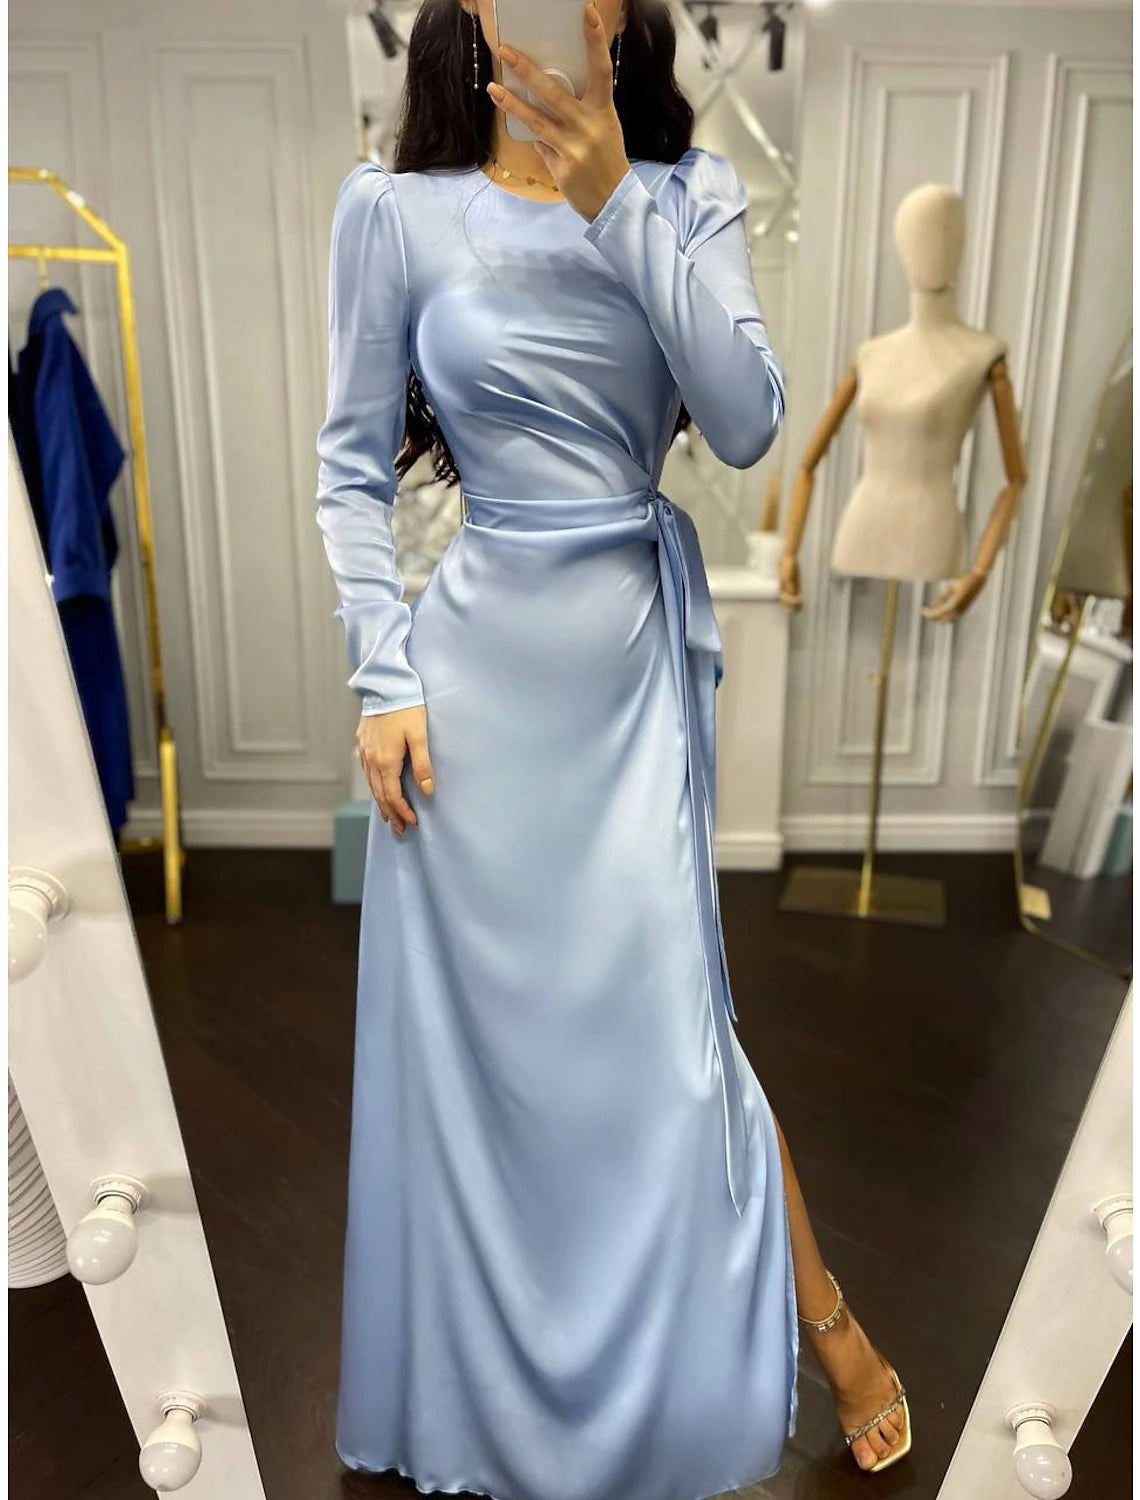 Sheath Party Dress Evening Gown Elegant Dress Wedding Guest Fall Floor Length Long Sleeve High Neck Bridesmaid Dress Satin with Ruched